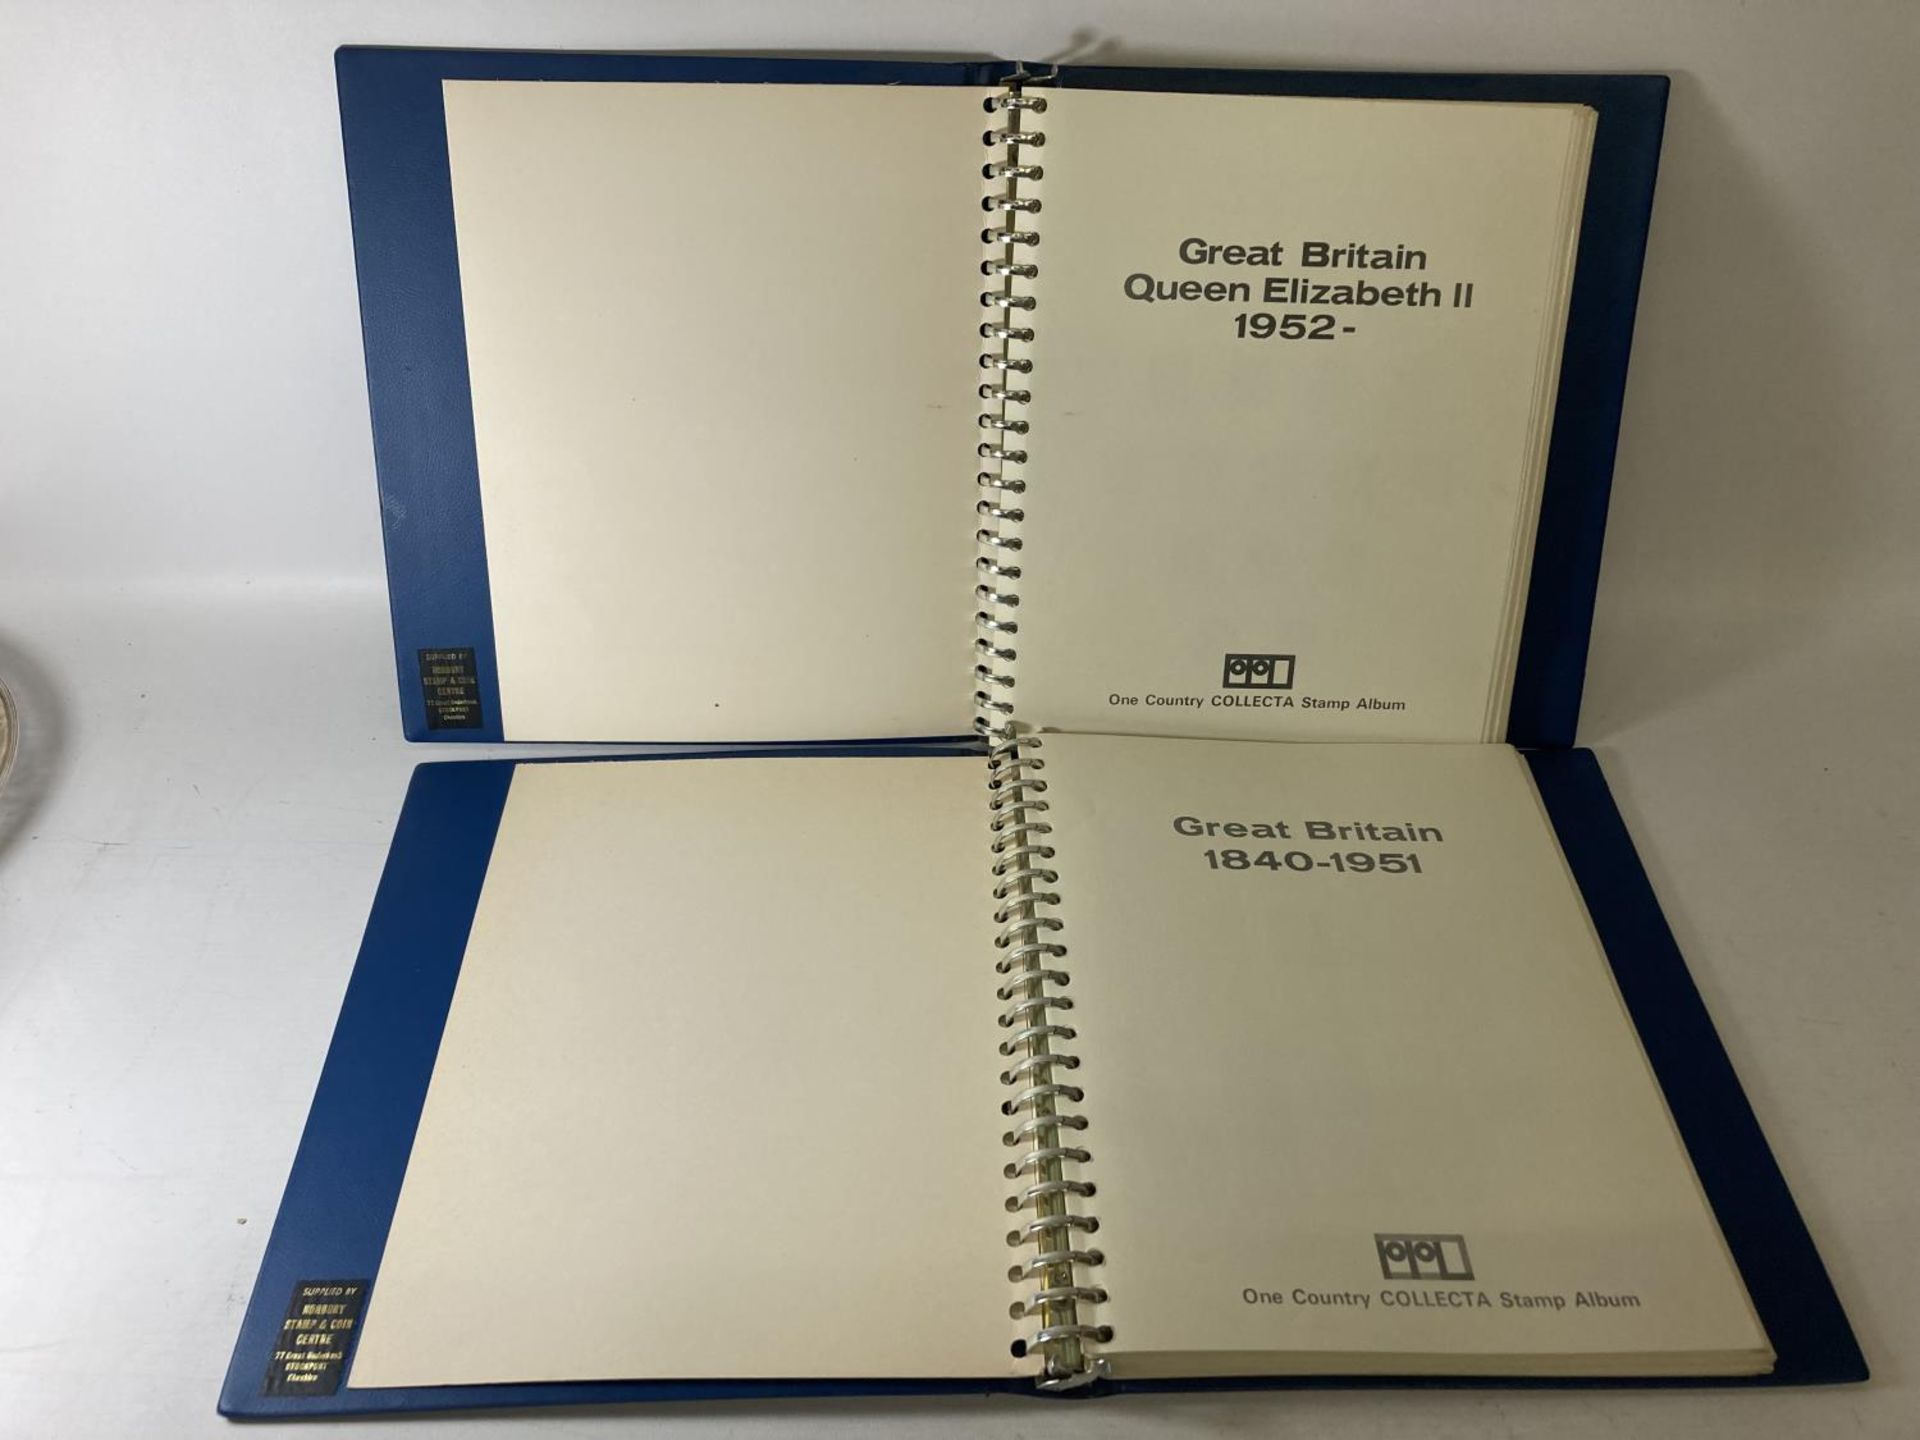 TWO BLUE STAMP ALBUMS CONTAINING STAMPS OF GREAT BRITAIN 1840 TO 1951 AND 1952 TO 1971